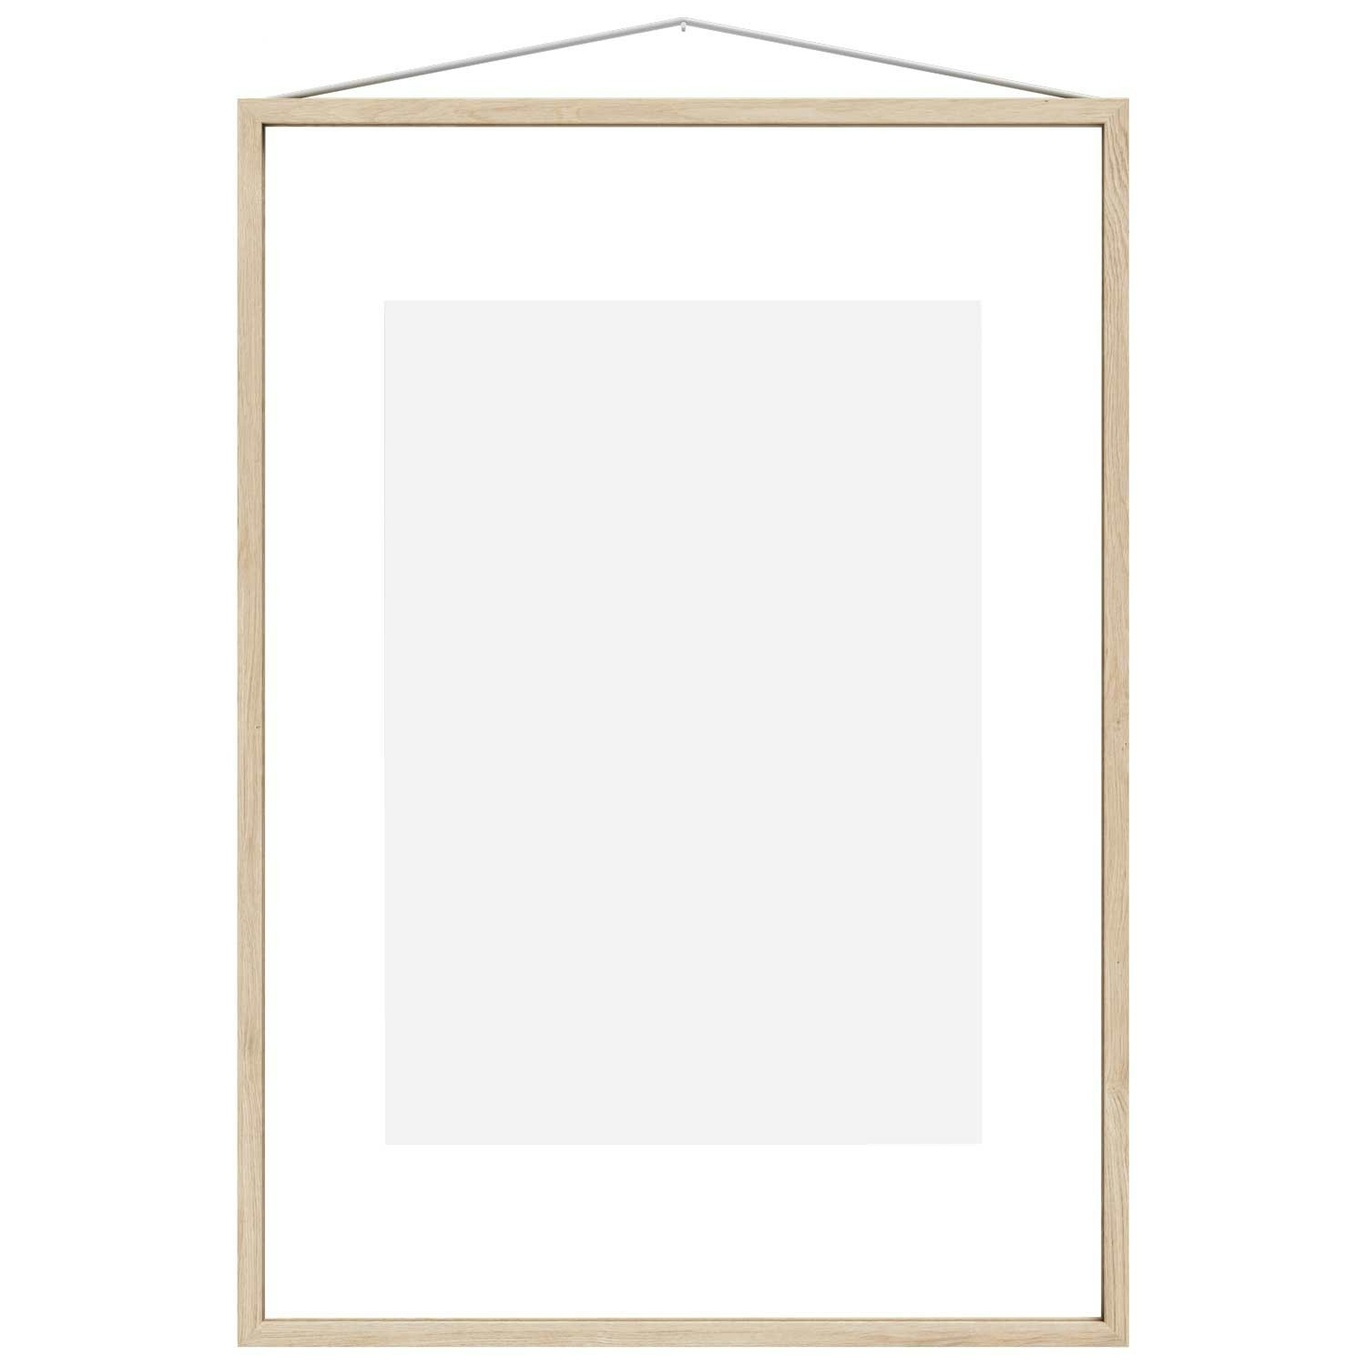 Frame A2 Ramme 44x61,5 cm, Ask